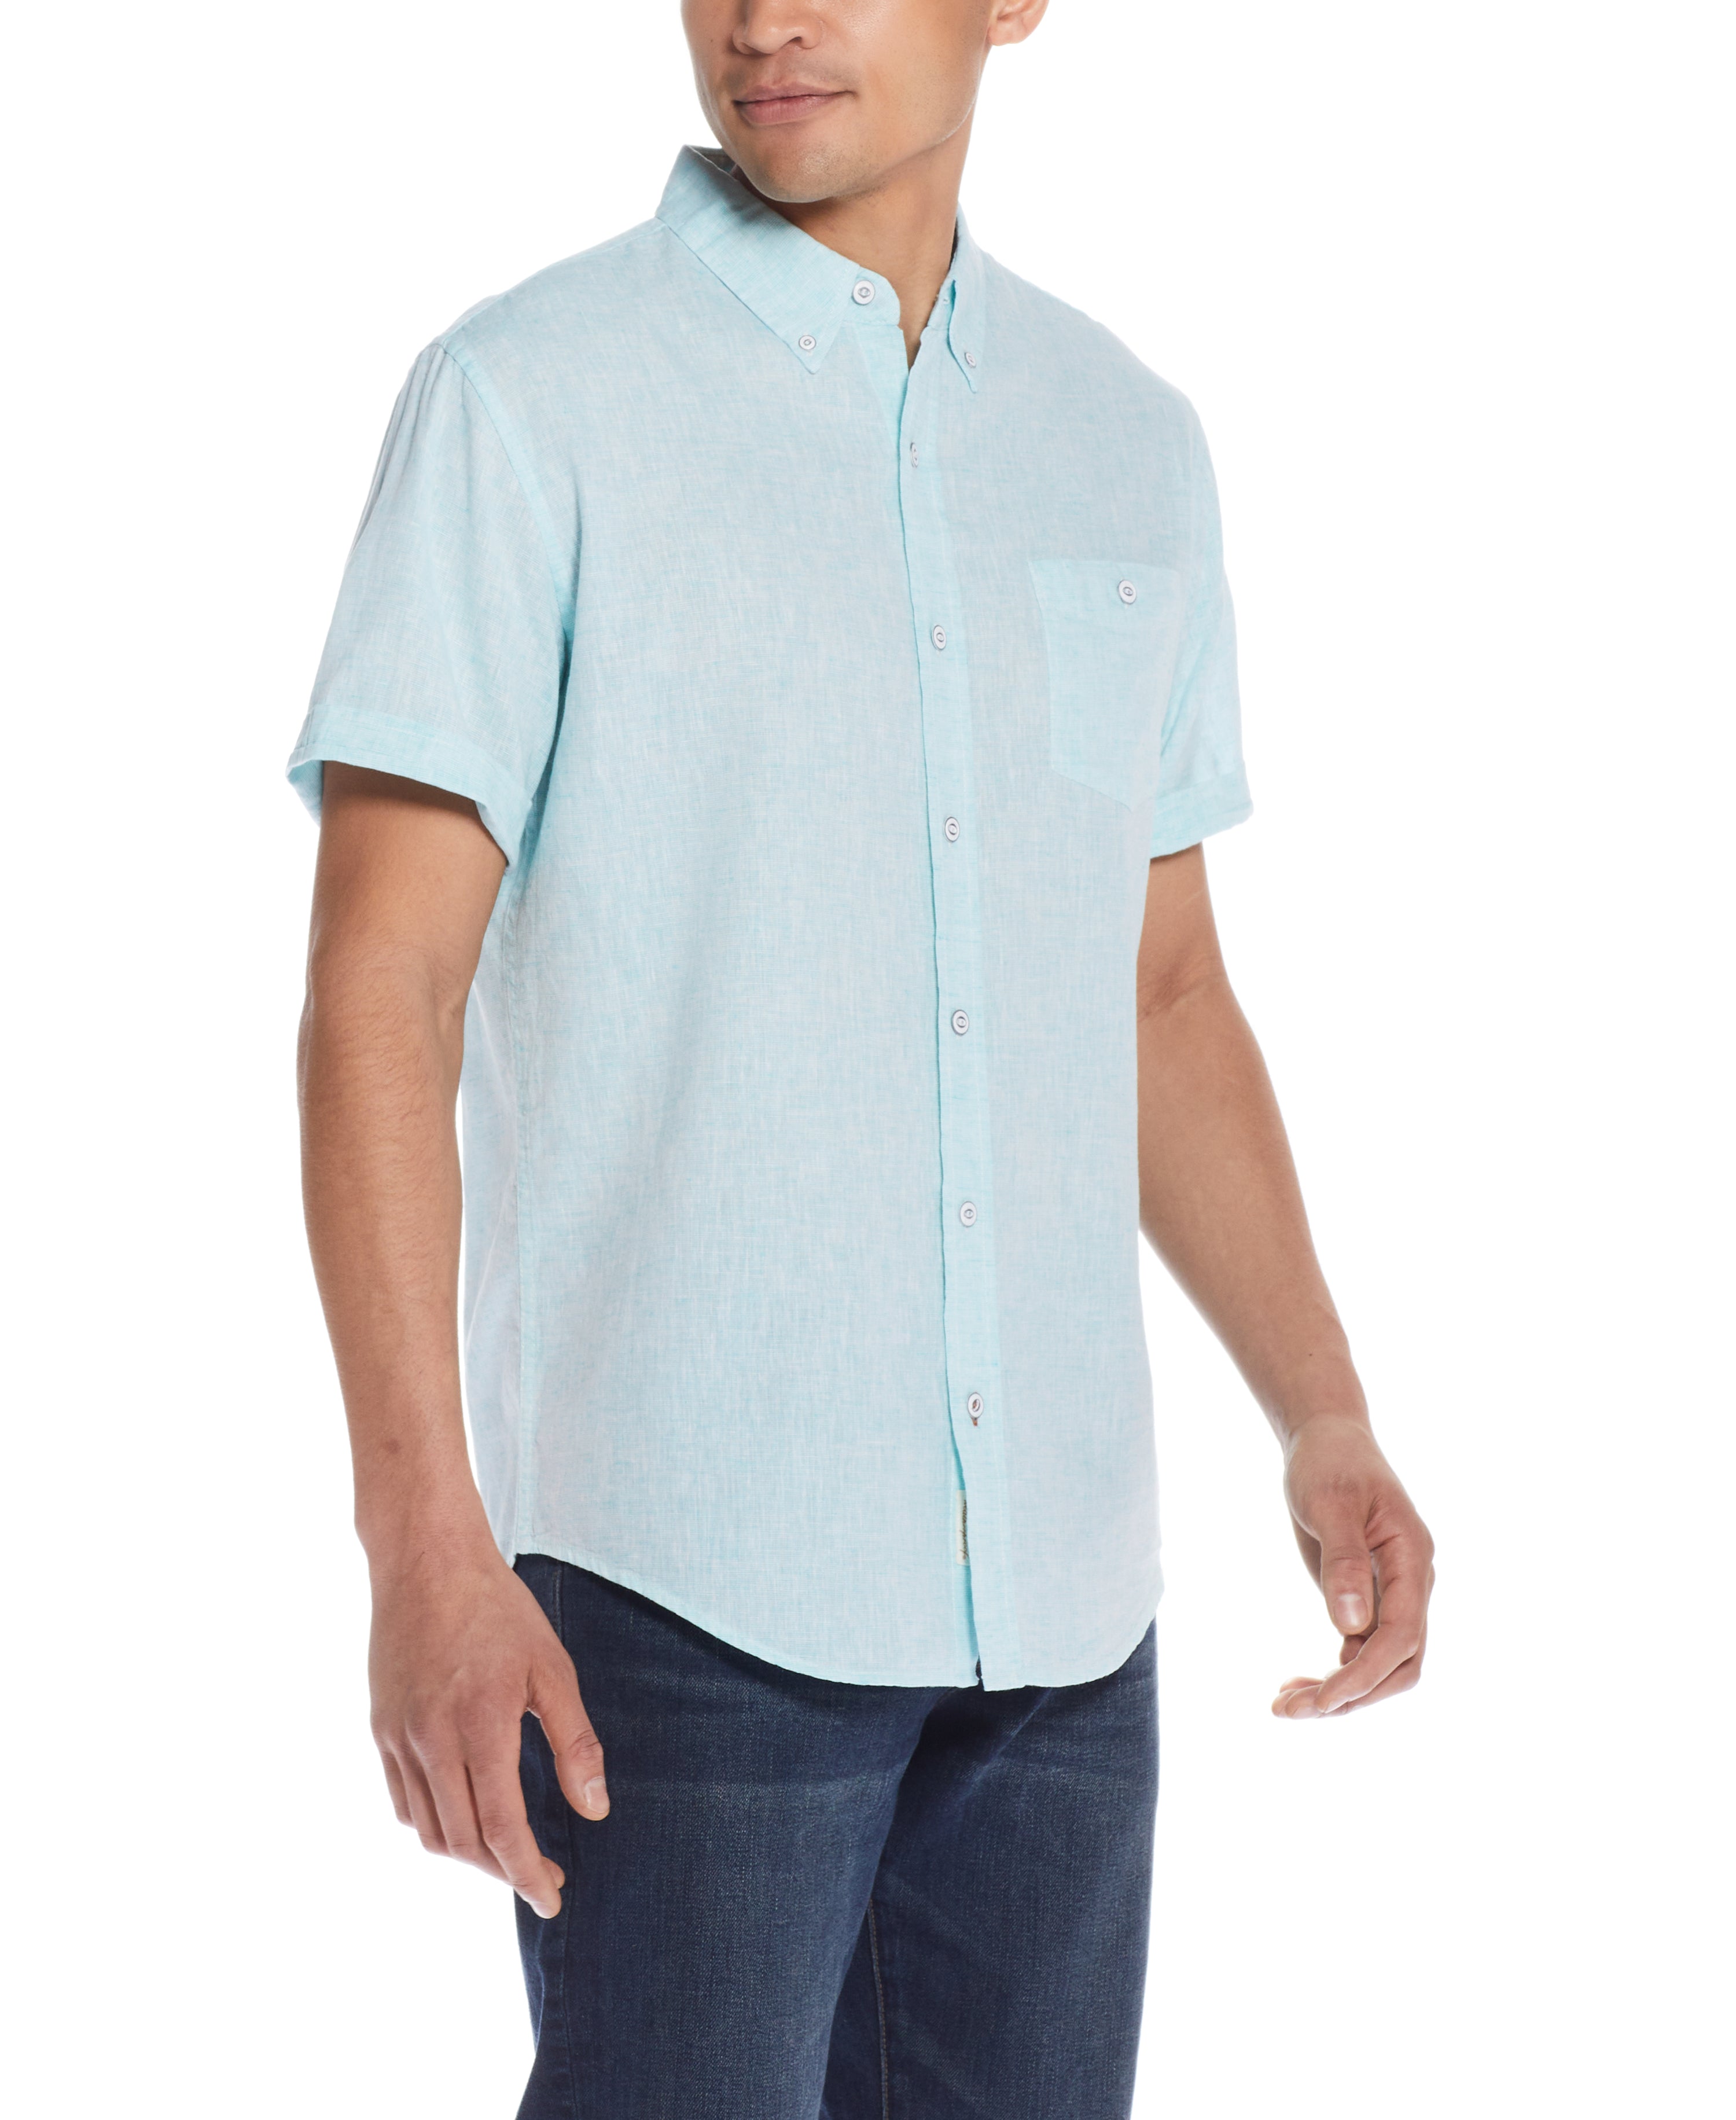 Solid Linen Cotton Shirt in Mint